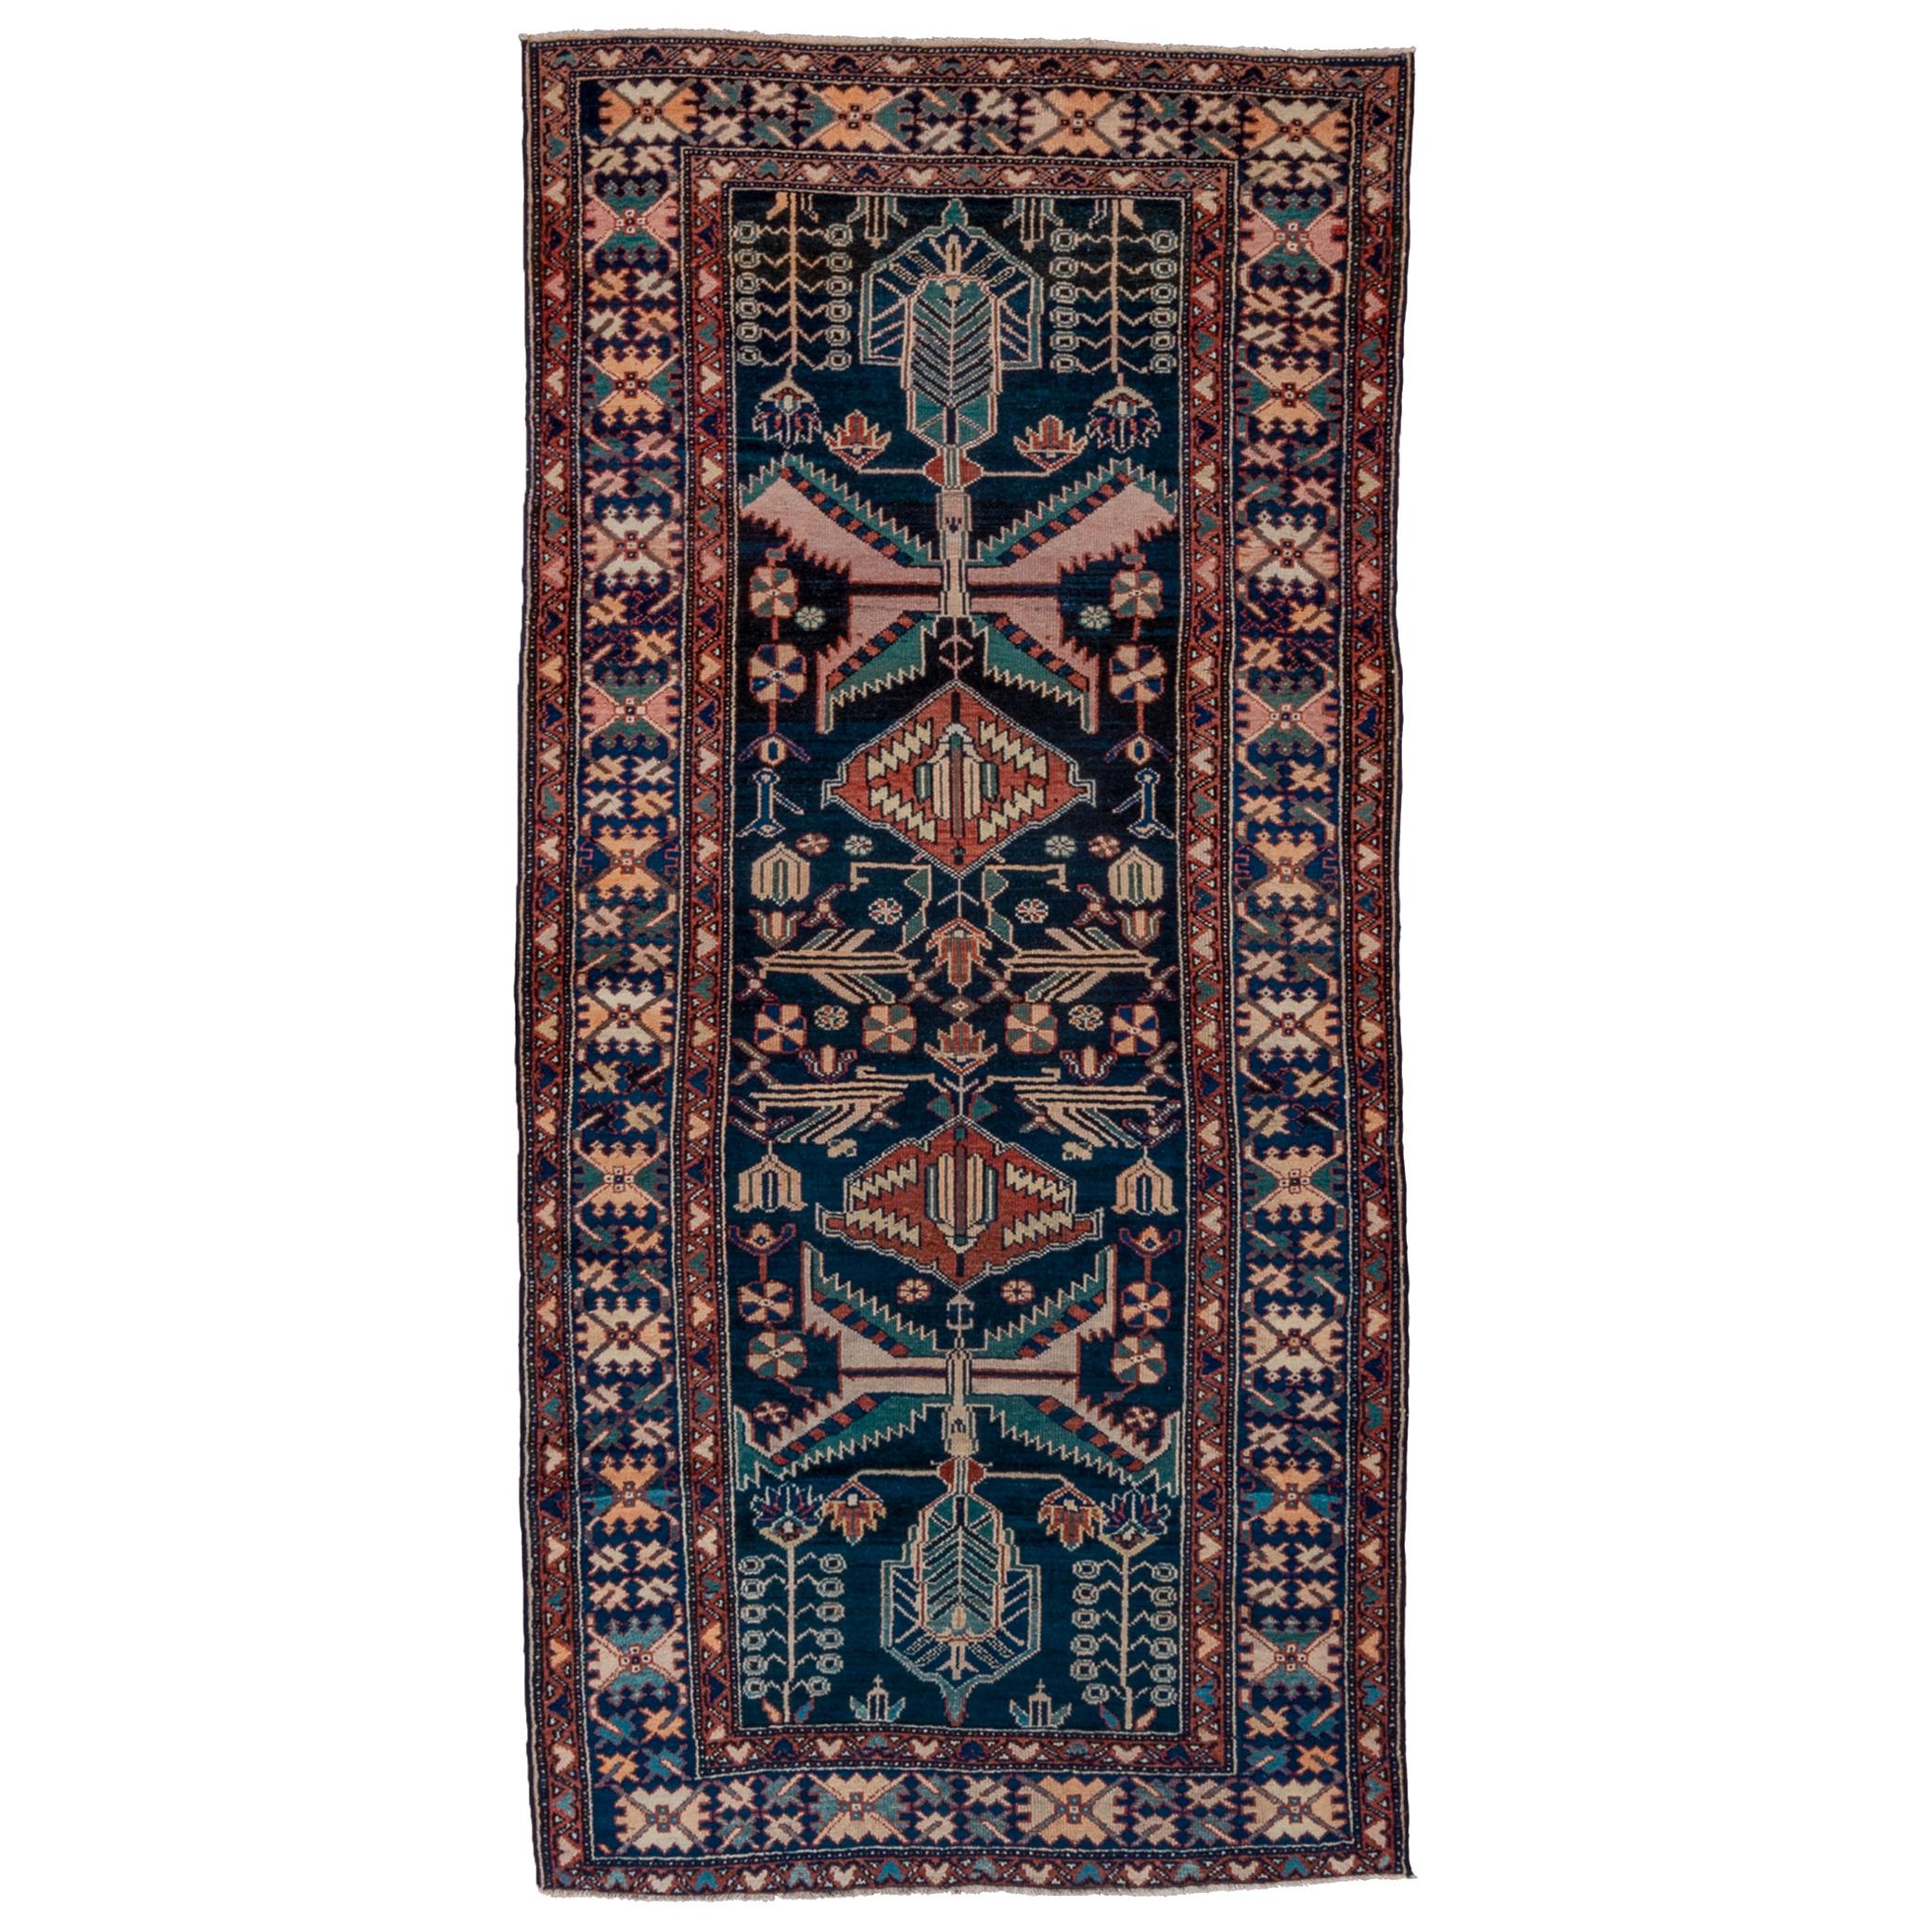 Antique Persian Malayer Rug, Blue Field, Teal Accents